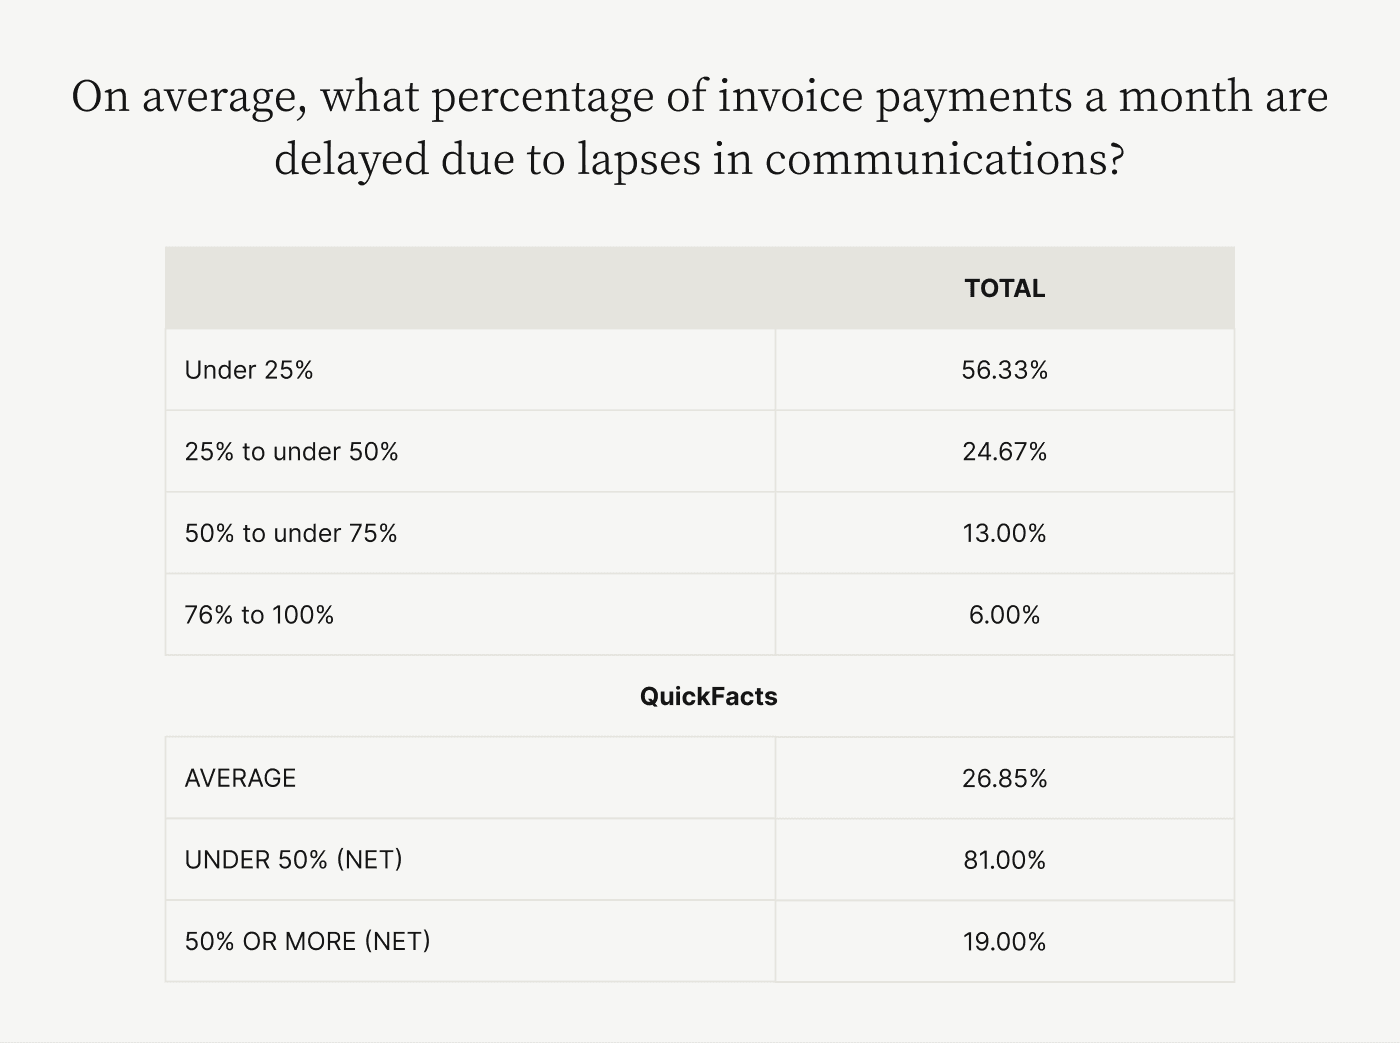 On average, what percentage of invoice payments a month are delayed due to lapses in communications?